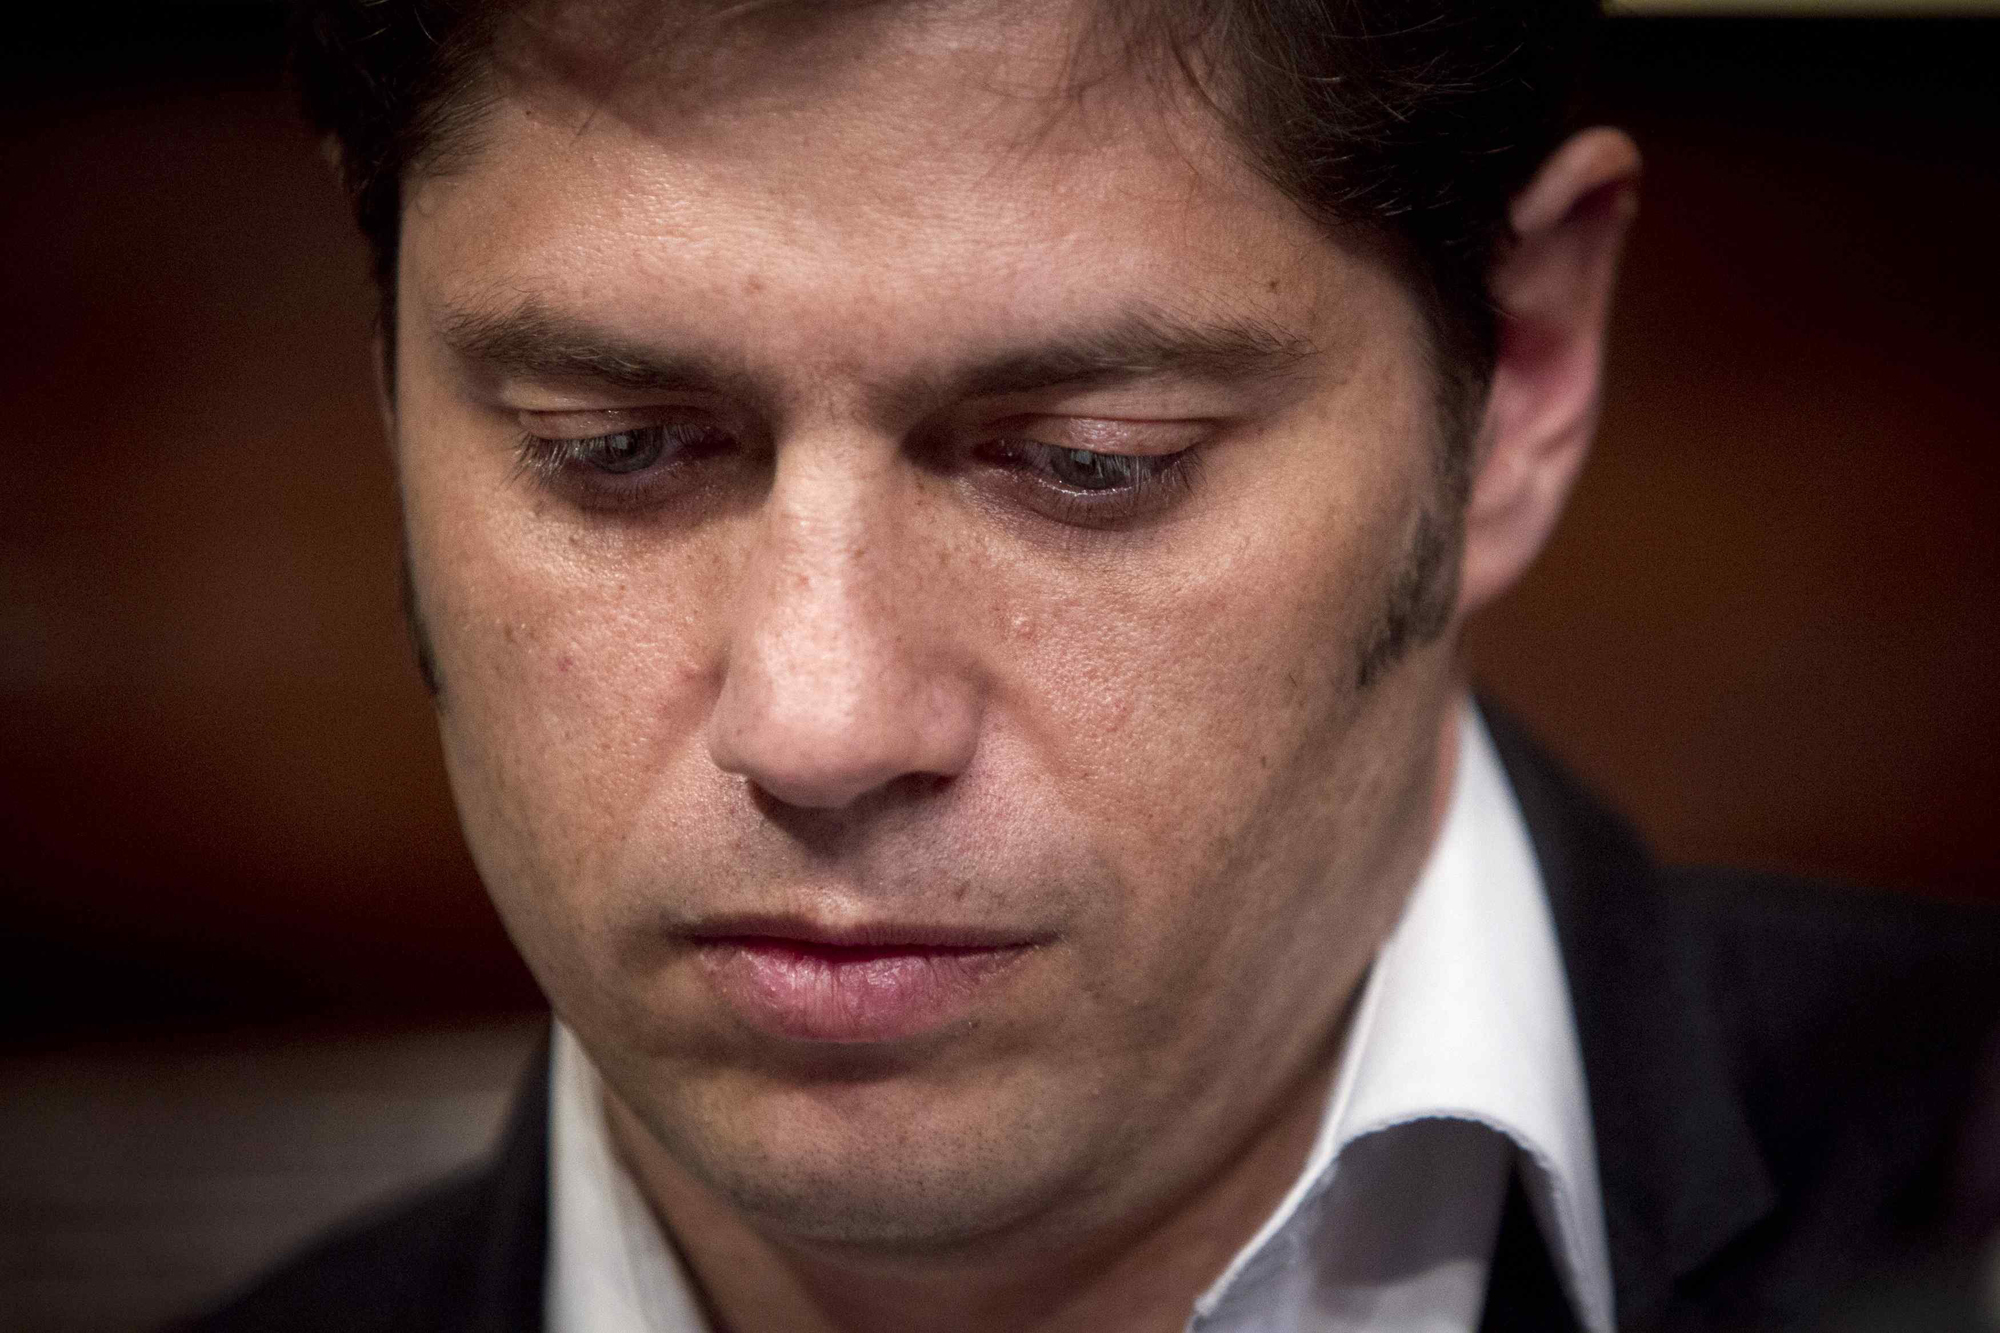 Argentina's Economy Minister Axel Kicillof speaks to the media at a press conference at the Argentine Consulate in New York, July 30, 2014. Economy Minister Axel Kicillof speaks to the media at a press conference at the Argentine Consulate in New York